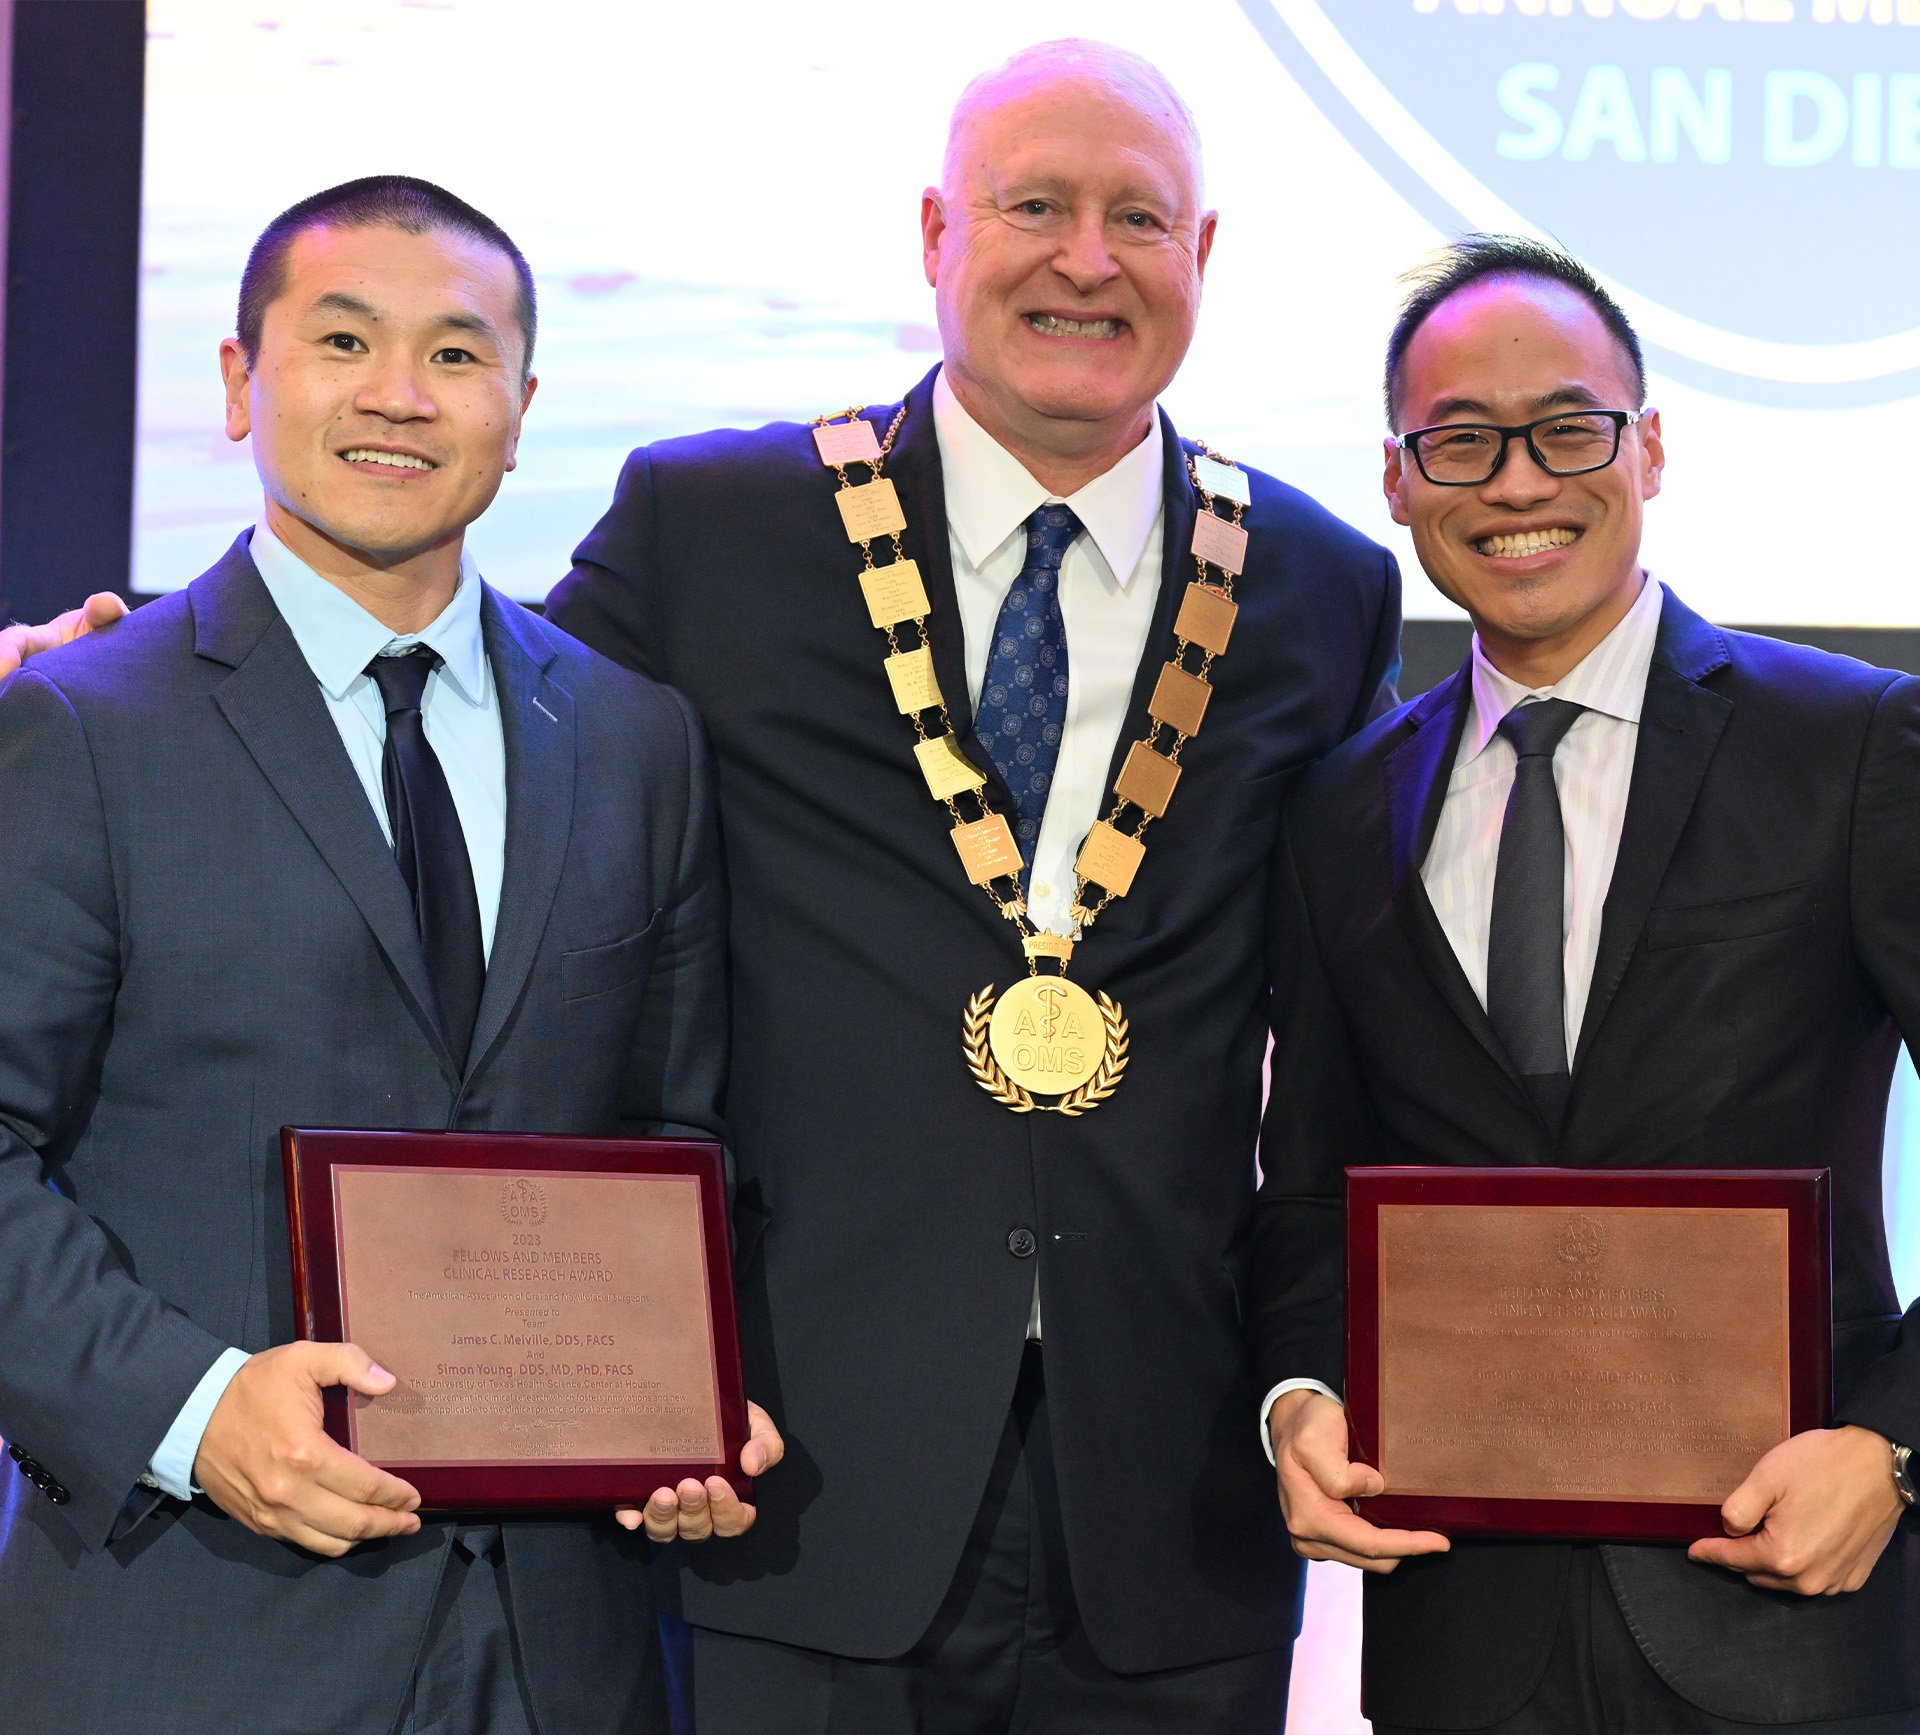 Drs. James C. Melville (left) and Simon W. Young (right) accepted the 2023 Clinical Research Award from American Association for Oral and Maxillofacial Surgeons 2022-23 President, Dr. Paul J. Schwartz.